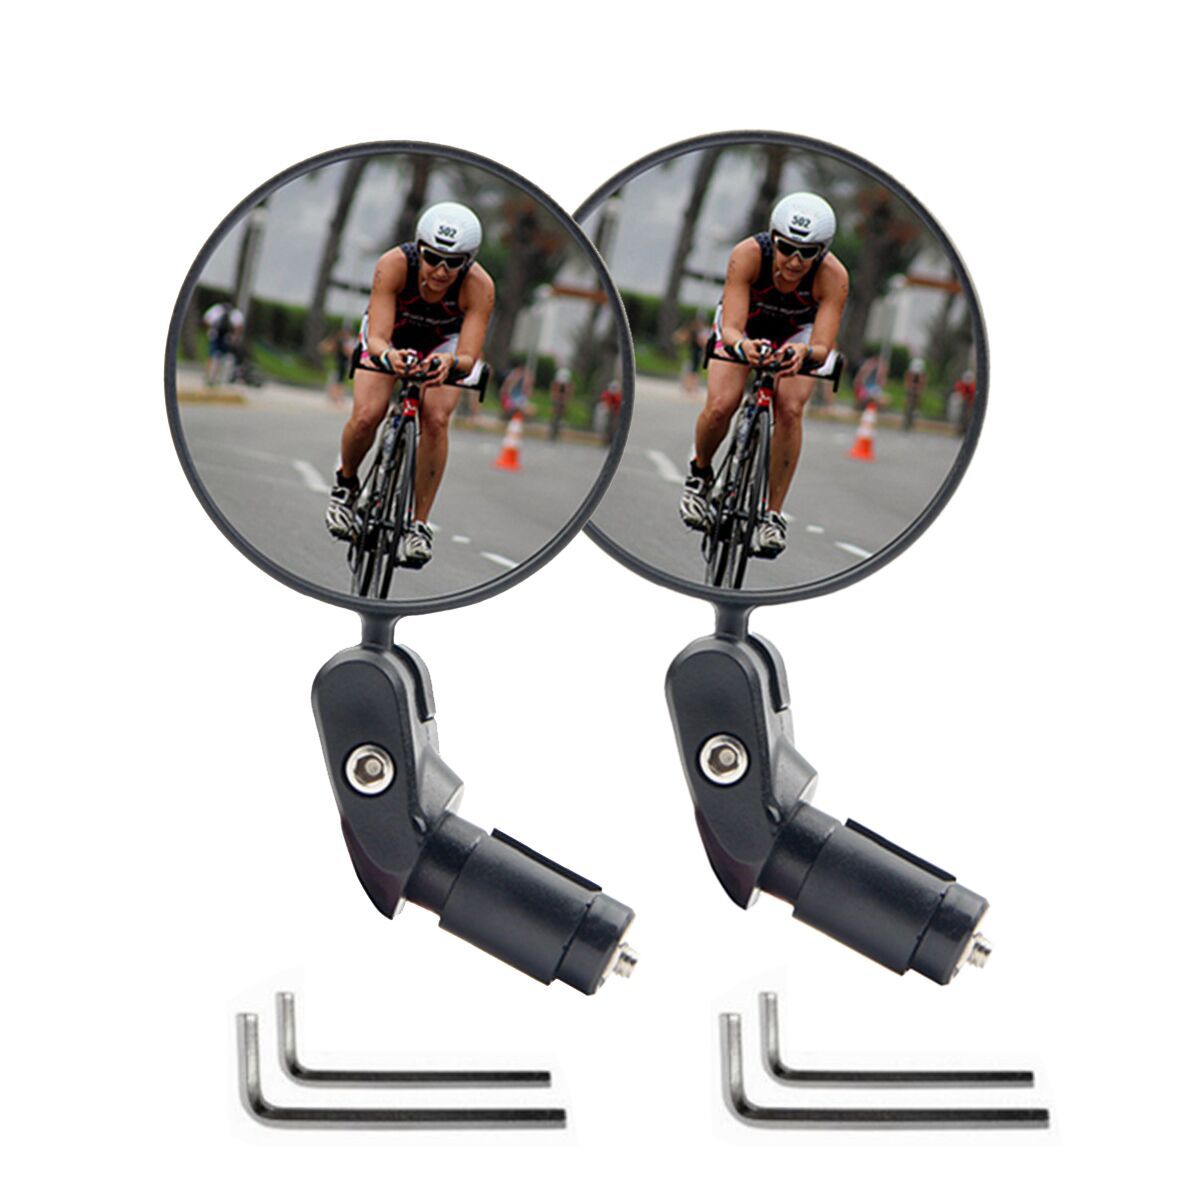 Universal Bicycle Rearview Mirror Adjustable Rotate Wide-Angle Cycling Handlebar Rear View - bicycle rearview mirror - 1